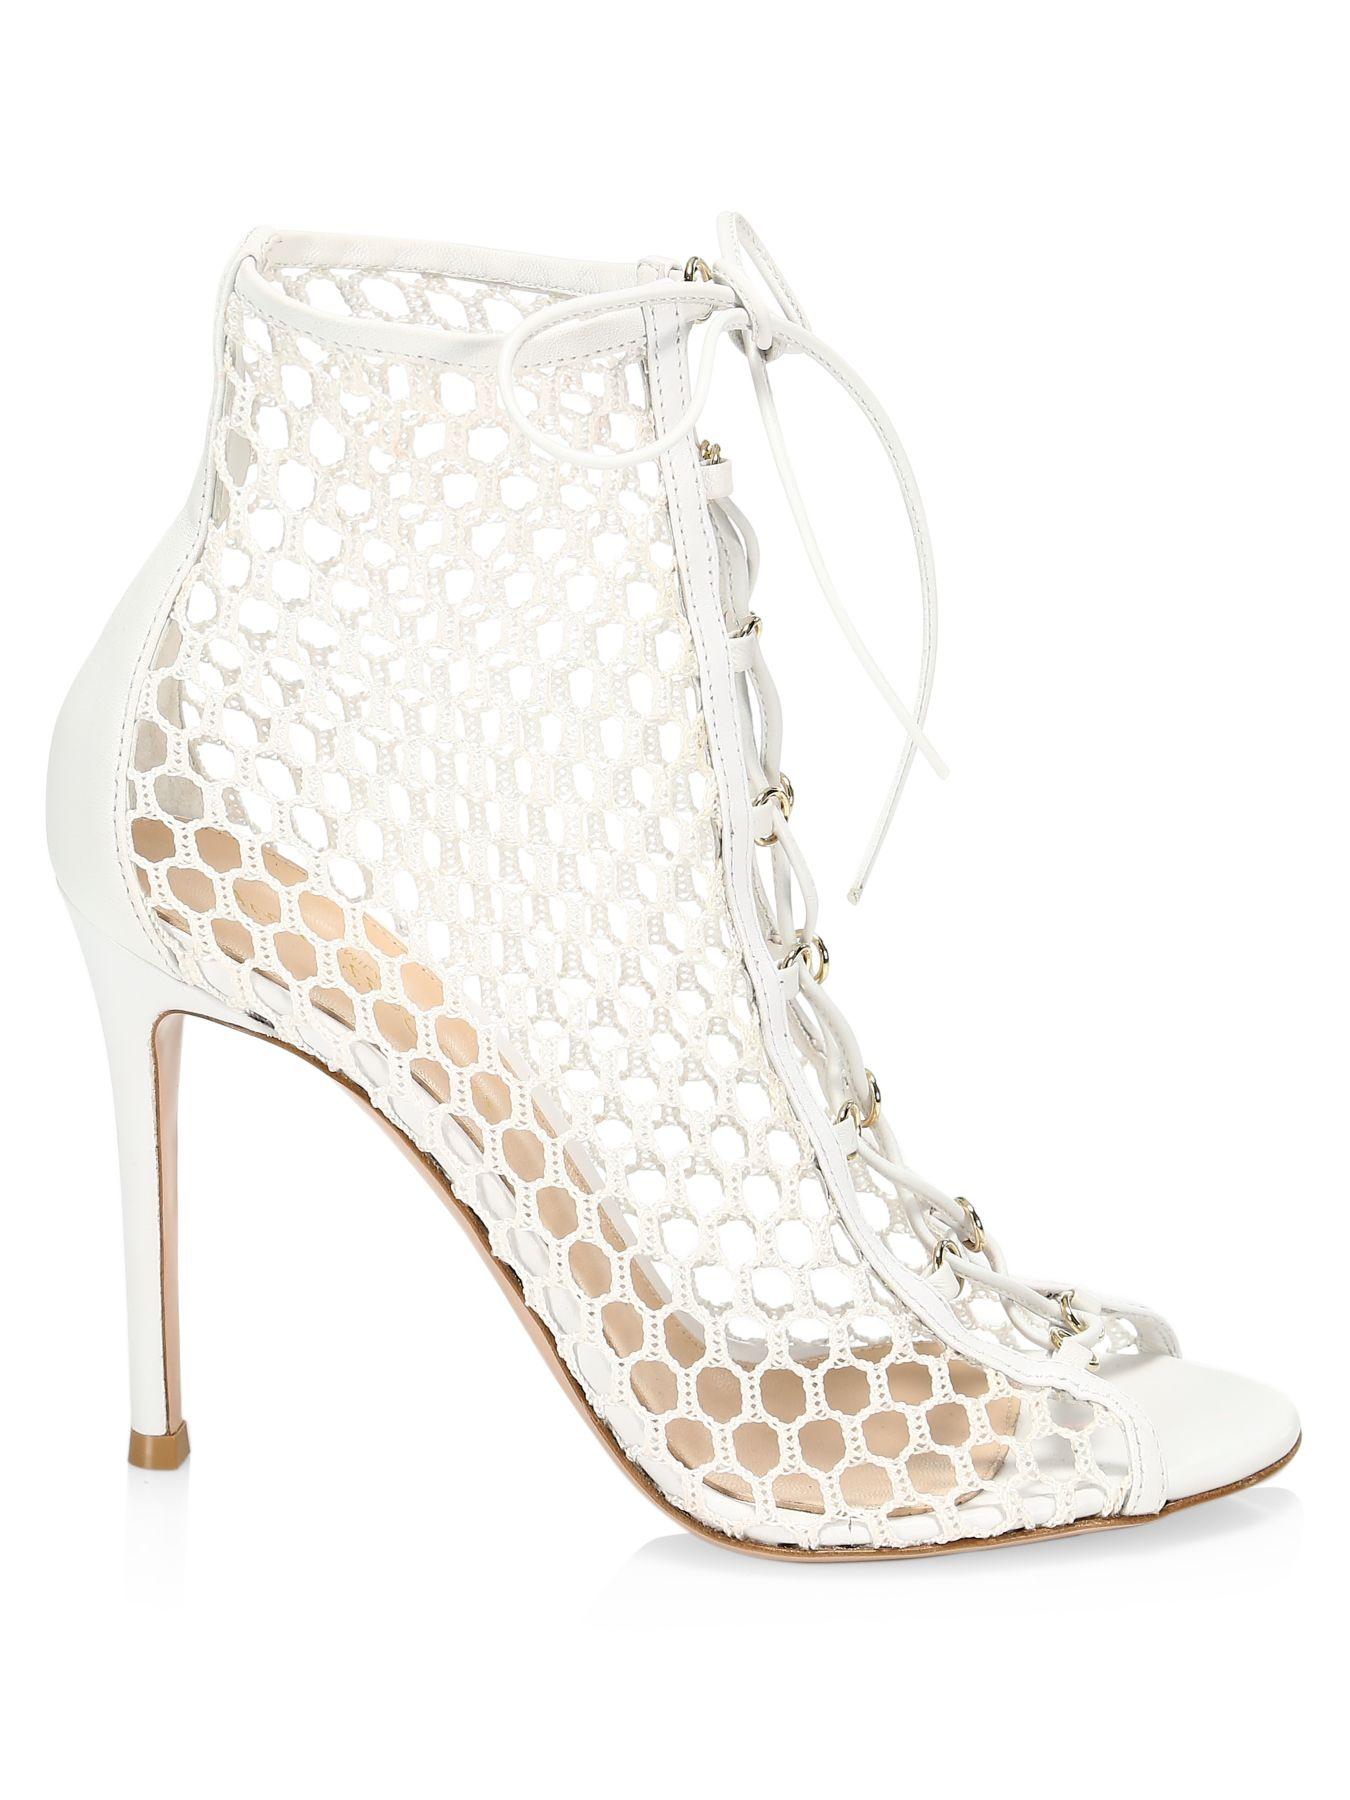 Gianvito Rossi Helena Lace-up Mesh Leather Booties in White - Lyst